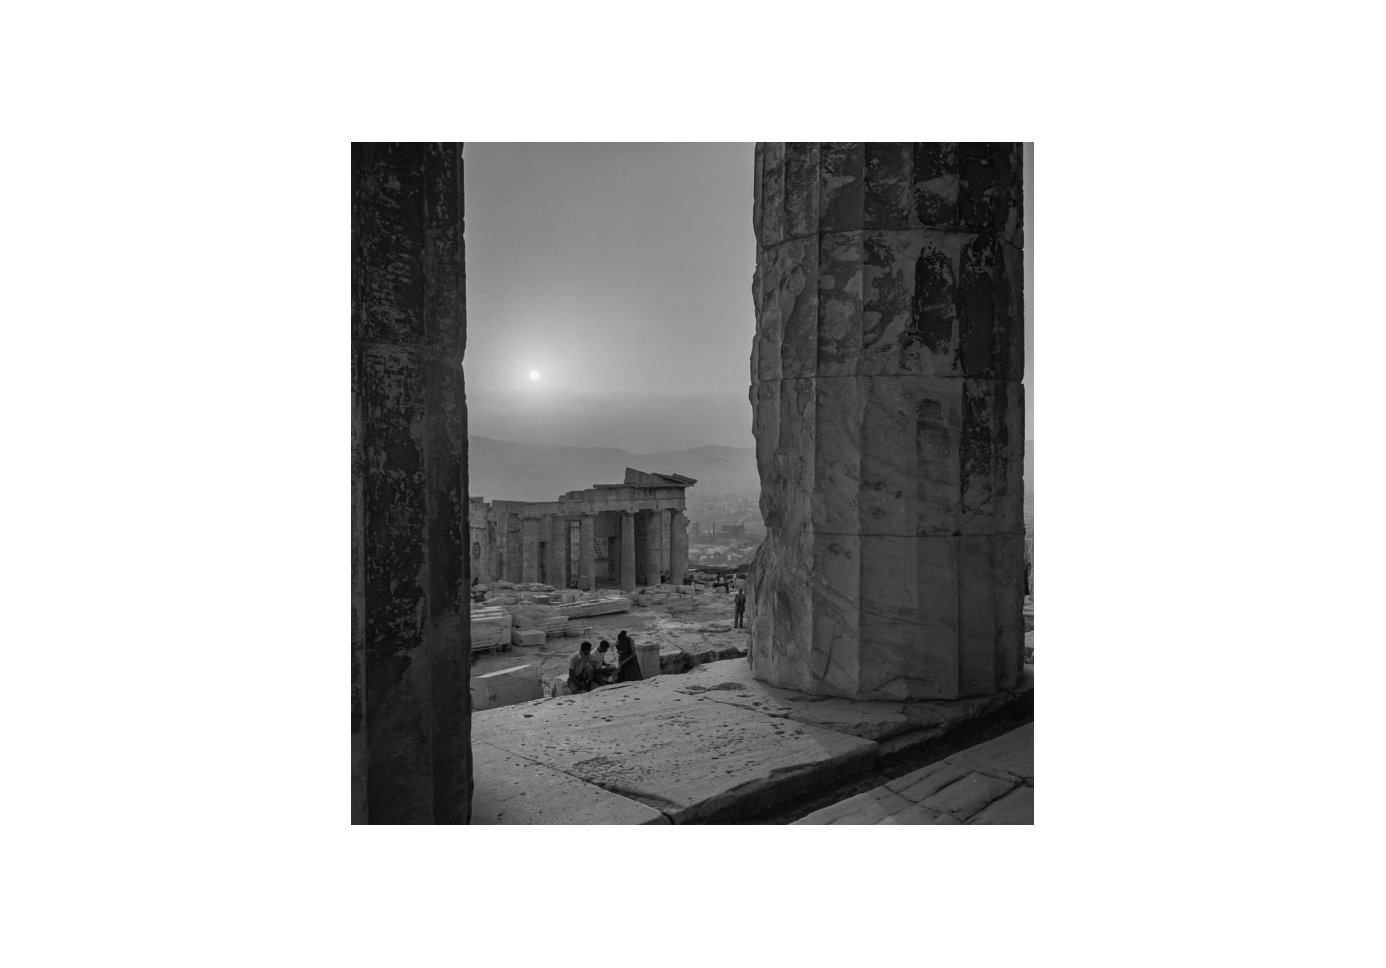 A view of the Parthenon from the Propylaea, in the 1950s, taken by photographer Robert McCabe.